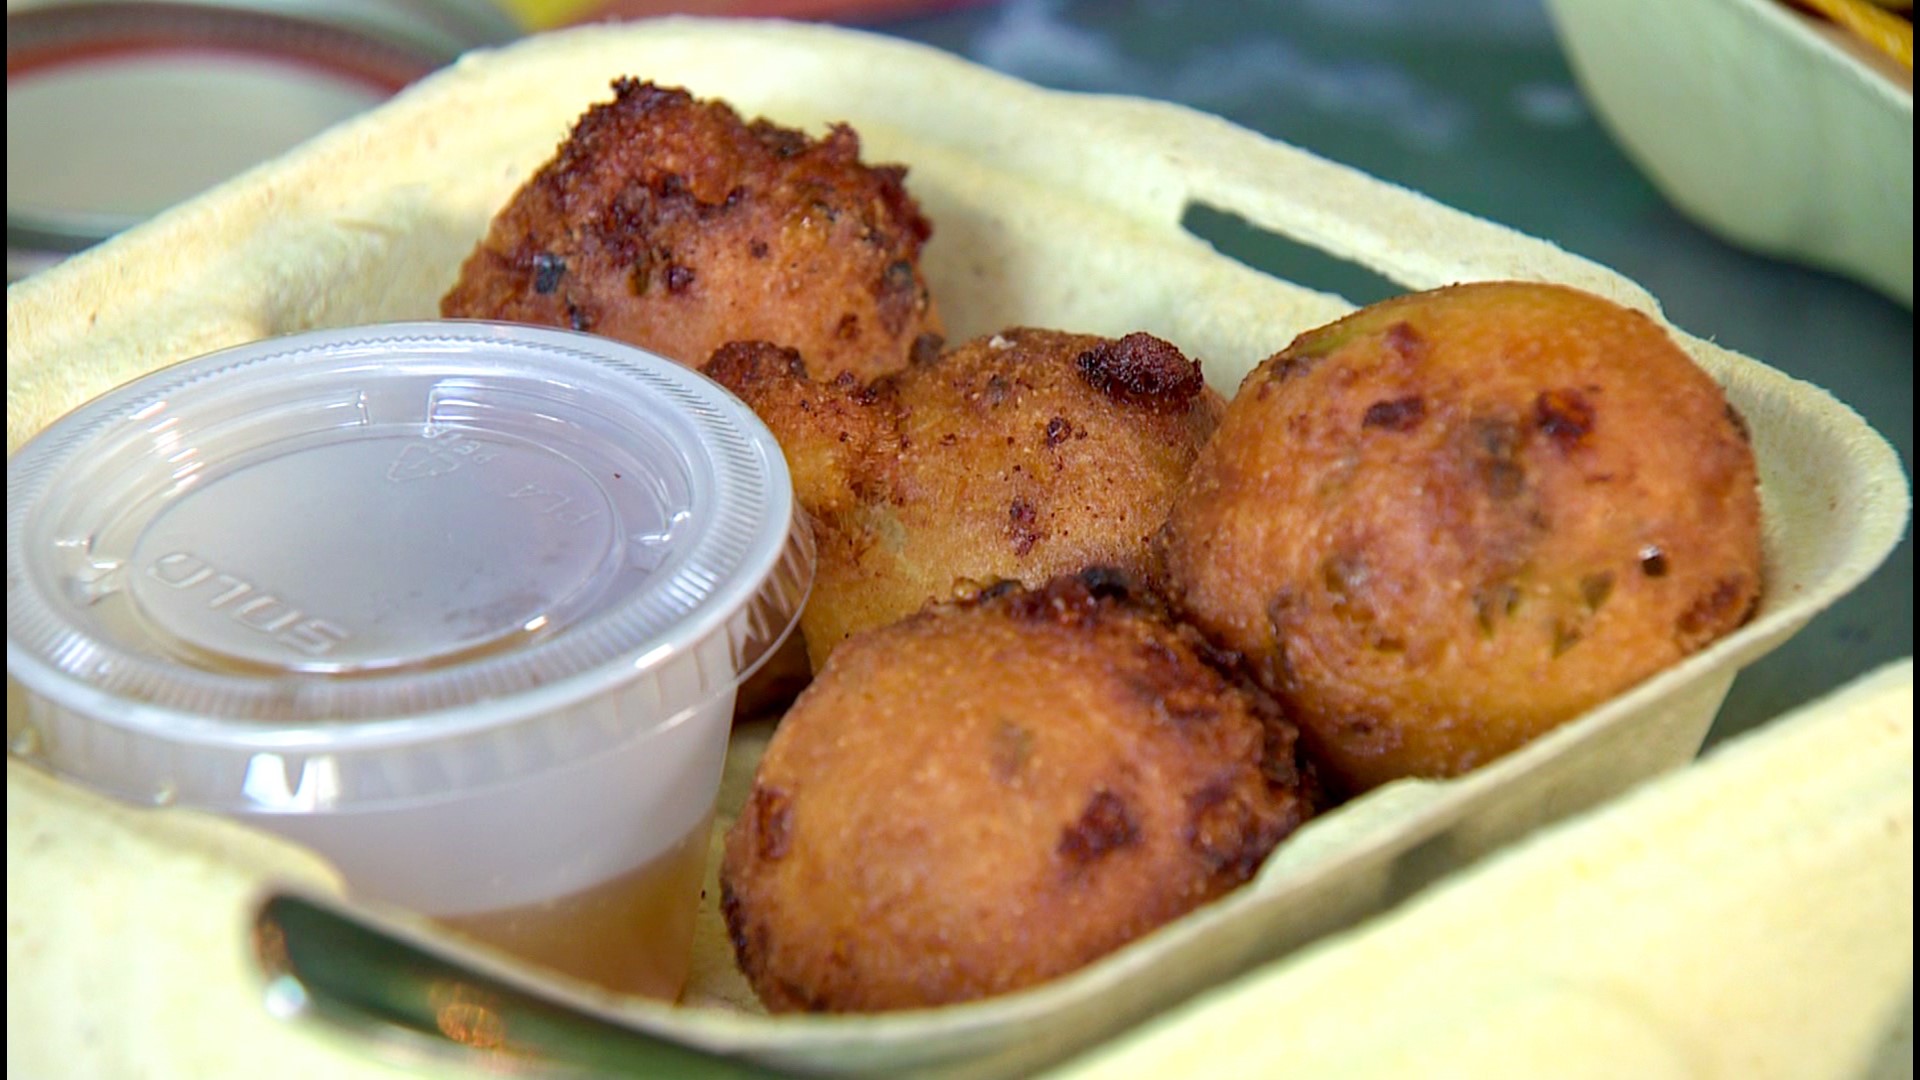 Marjorie is most known for the homemade steelcut plantain chips, but the hushpuppies are EVERYTHING. #k5evening